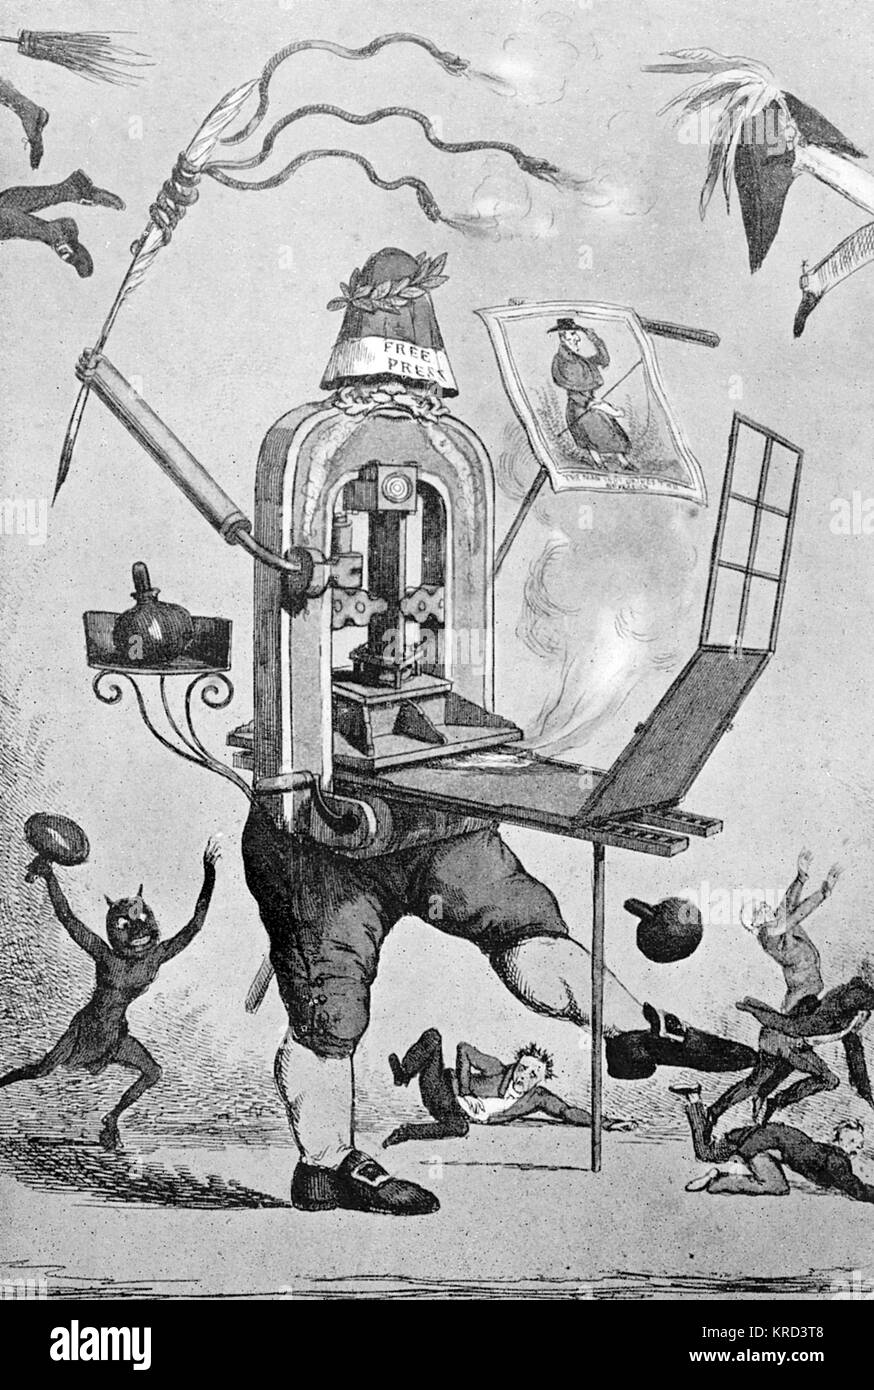 A print by H. Heath representing symbolically the fearless and trenchant attitude of the Press in early nineteenth century.  Its power is evidently directed against the Duke of Wellington who is depicted on the picture held by the printing press.  Note the printer's devil following behind.       Date: 1829 Stock Photo